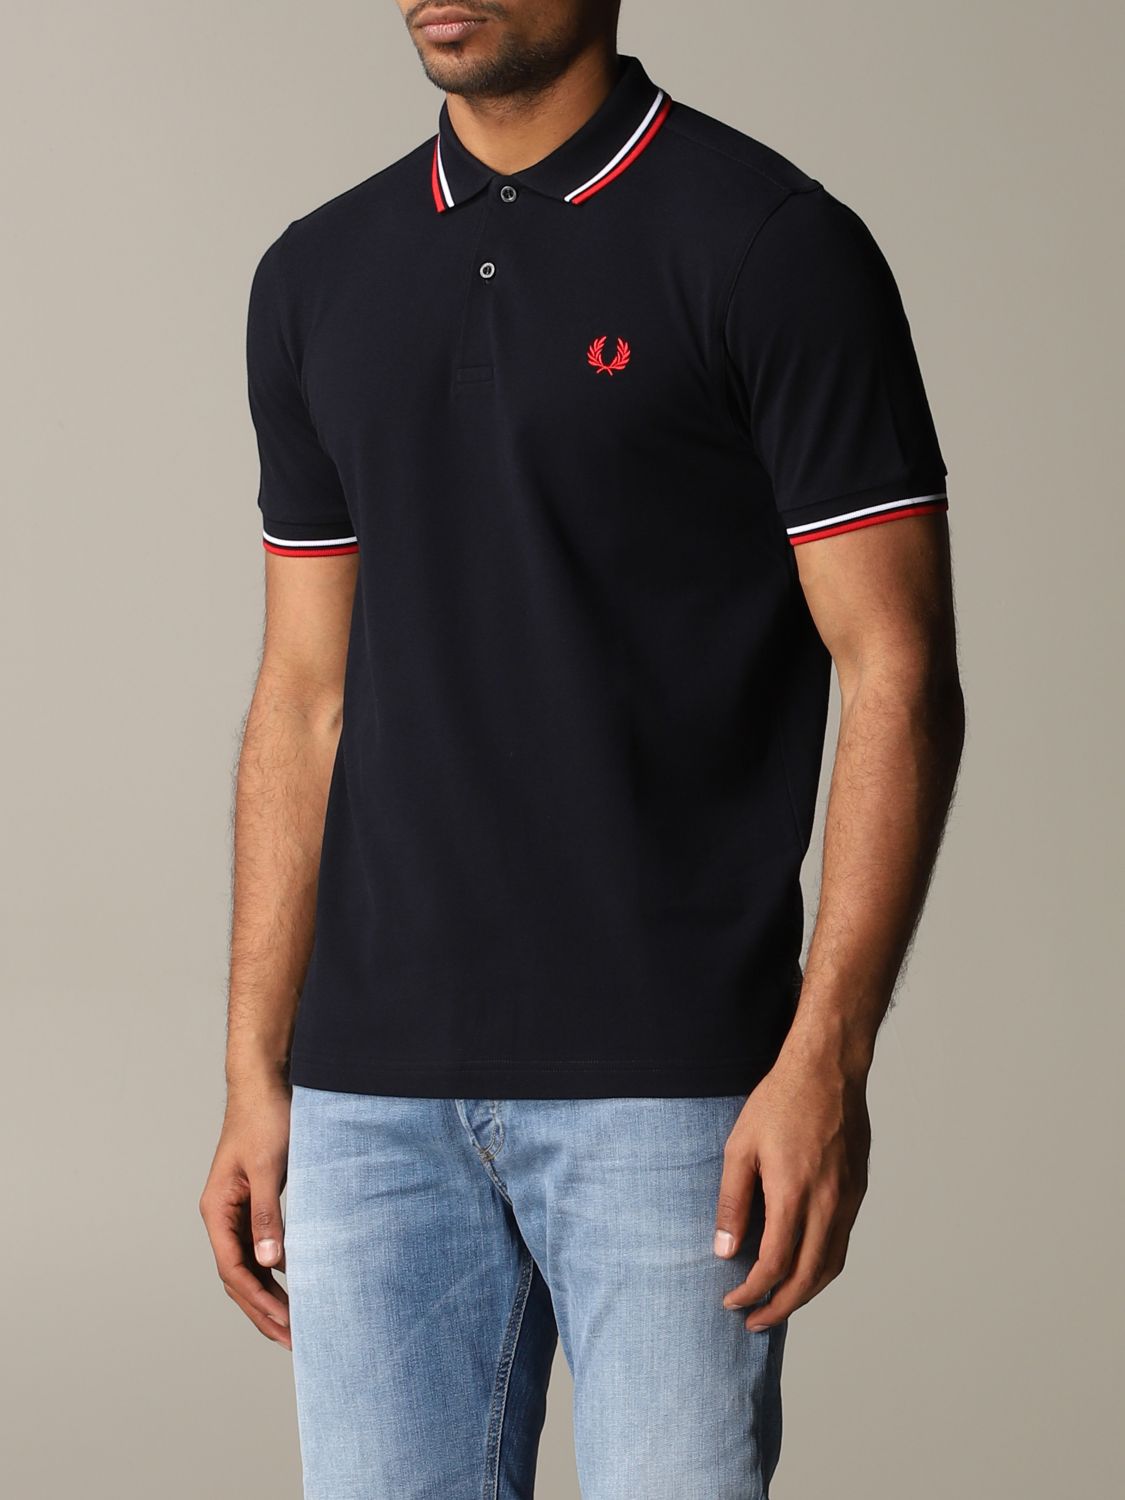 Fred Perry Outlet: polo shirt for man - Blue | Fred Perry polo shirt ...